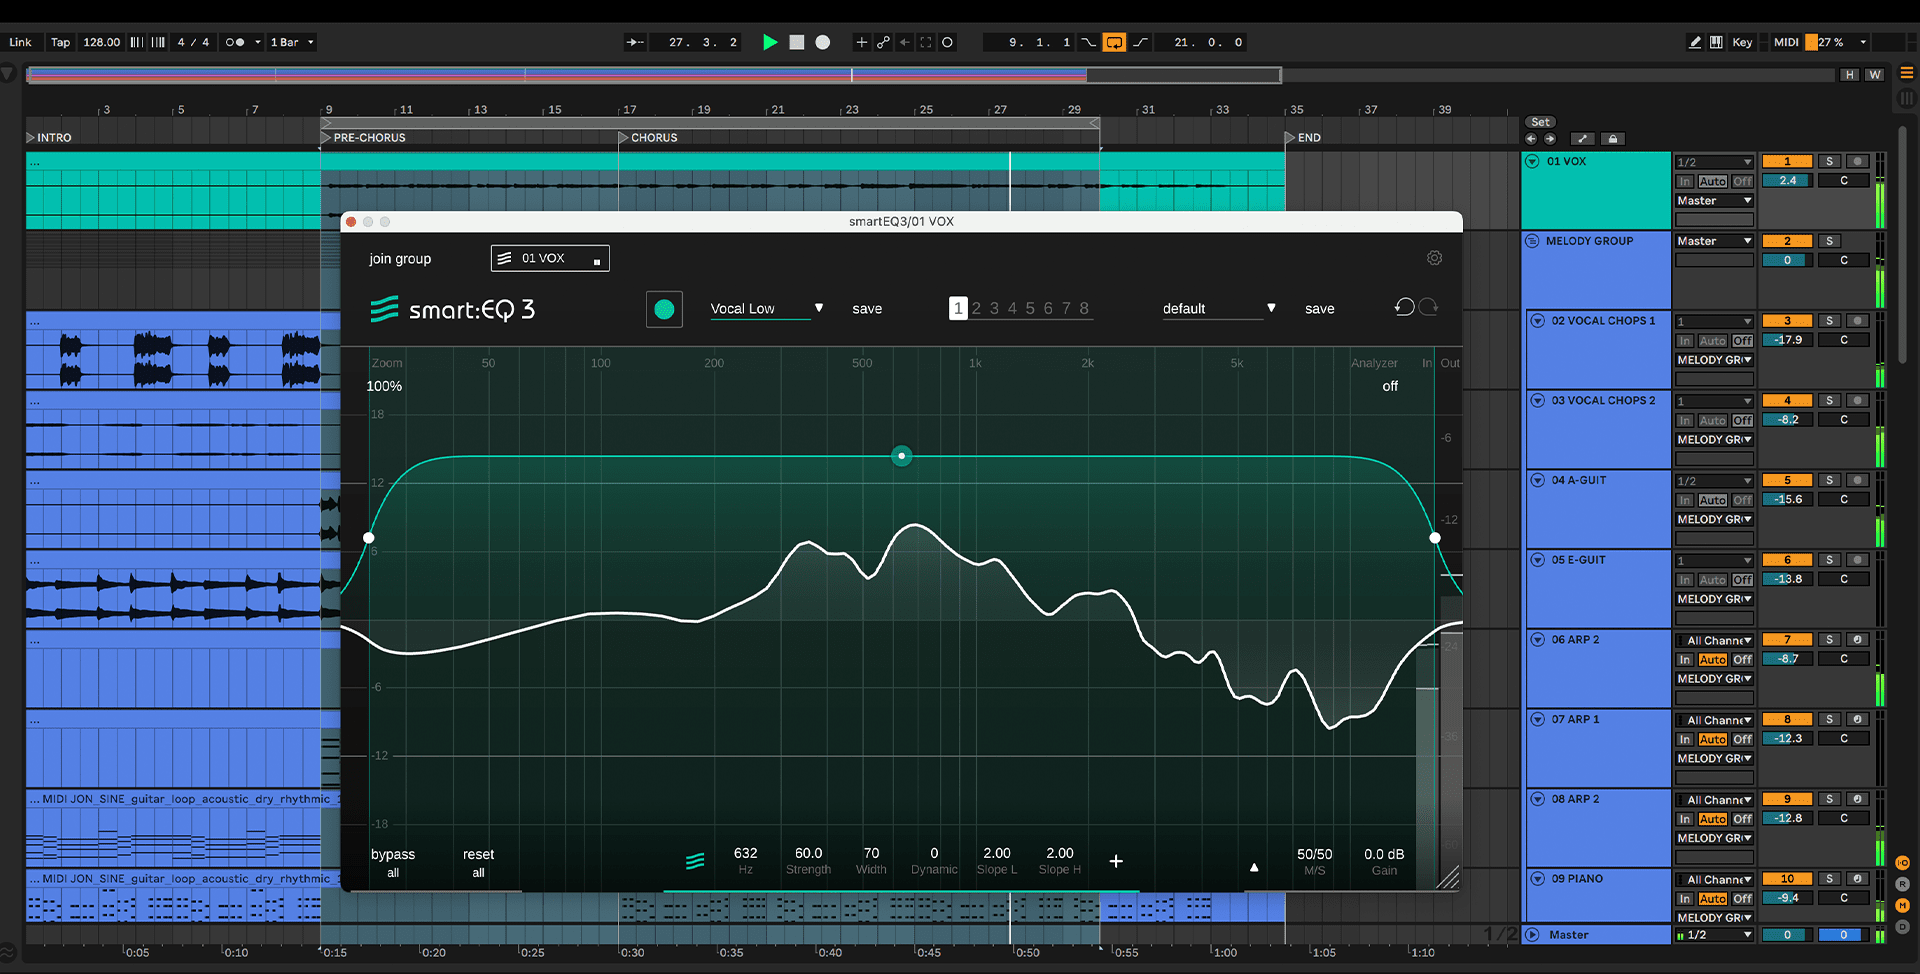 Interface of smart:EQ 3 with the chosen profile vocal low